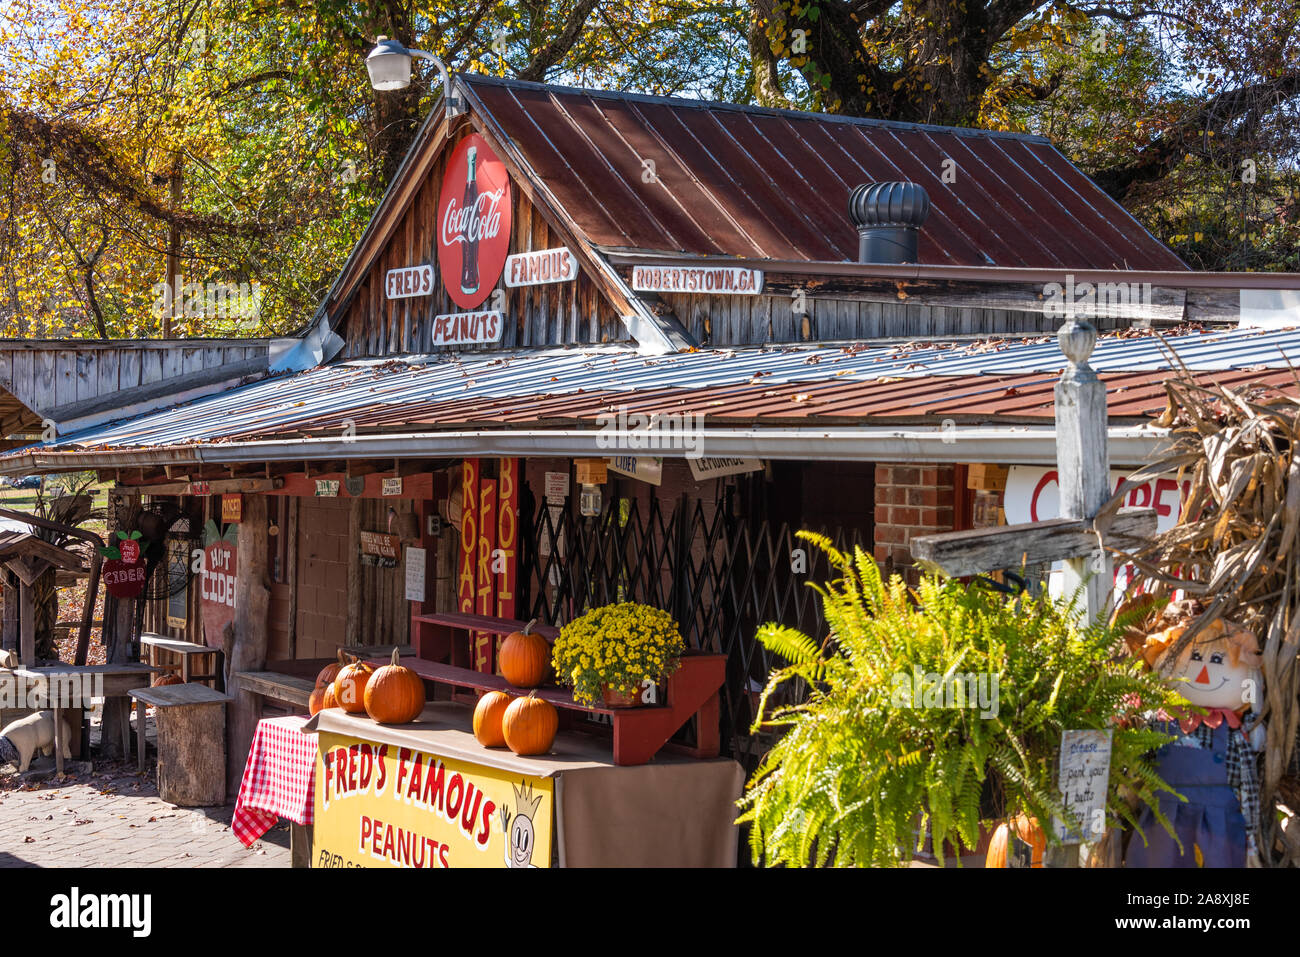 Fred's Famous Peanuts country store in Helen, Georgia, nestled in the Chattahoochee National Forest of the Blue Ridge Mountains. (USA) Stock Photo